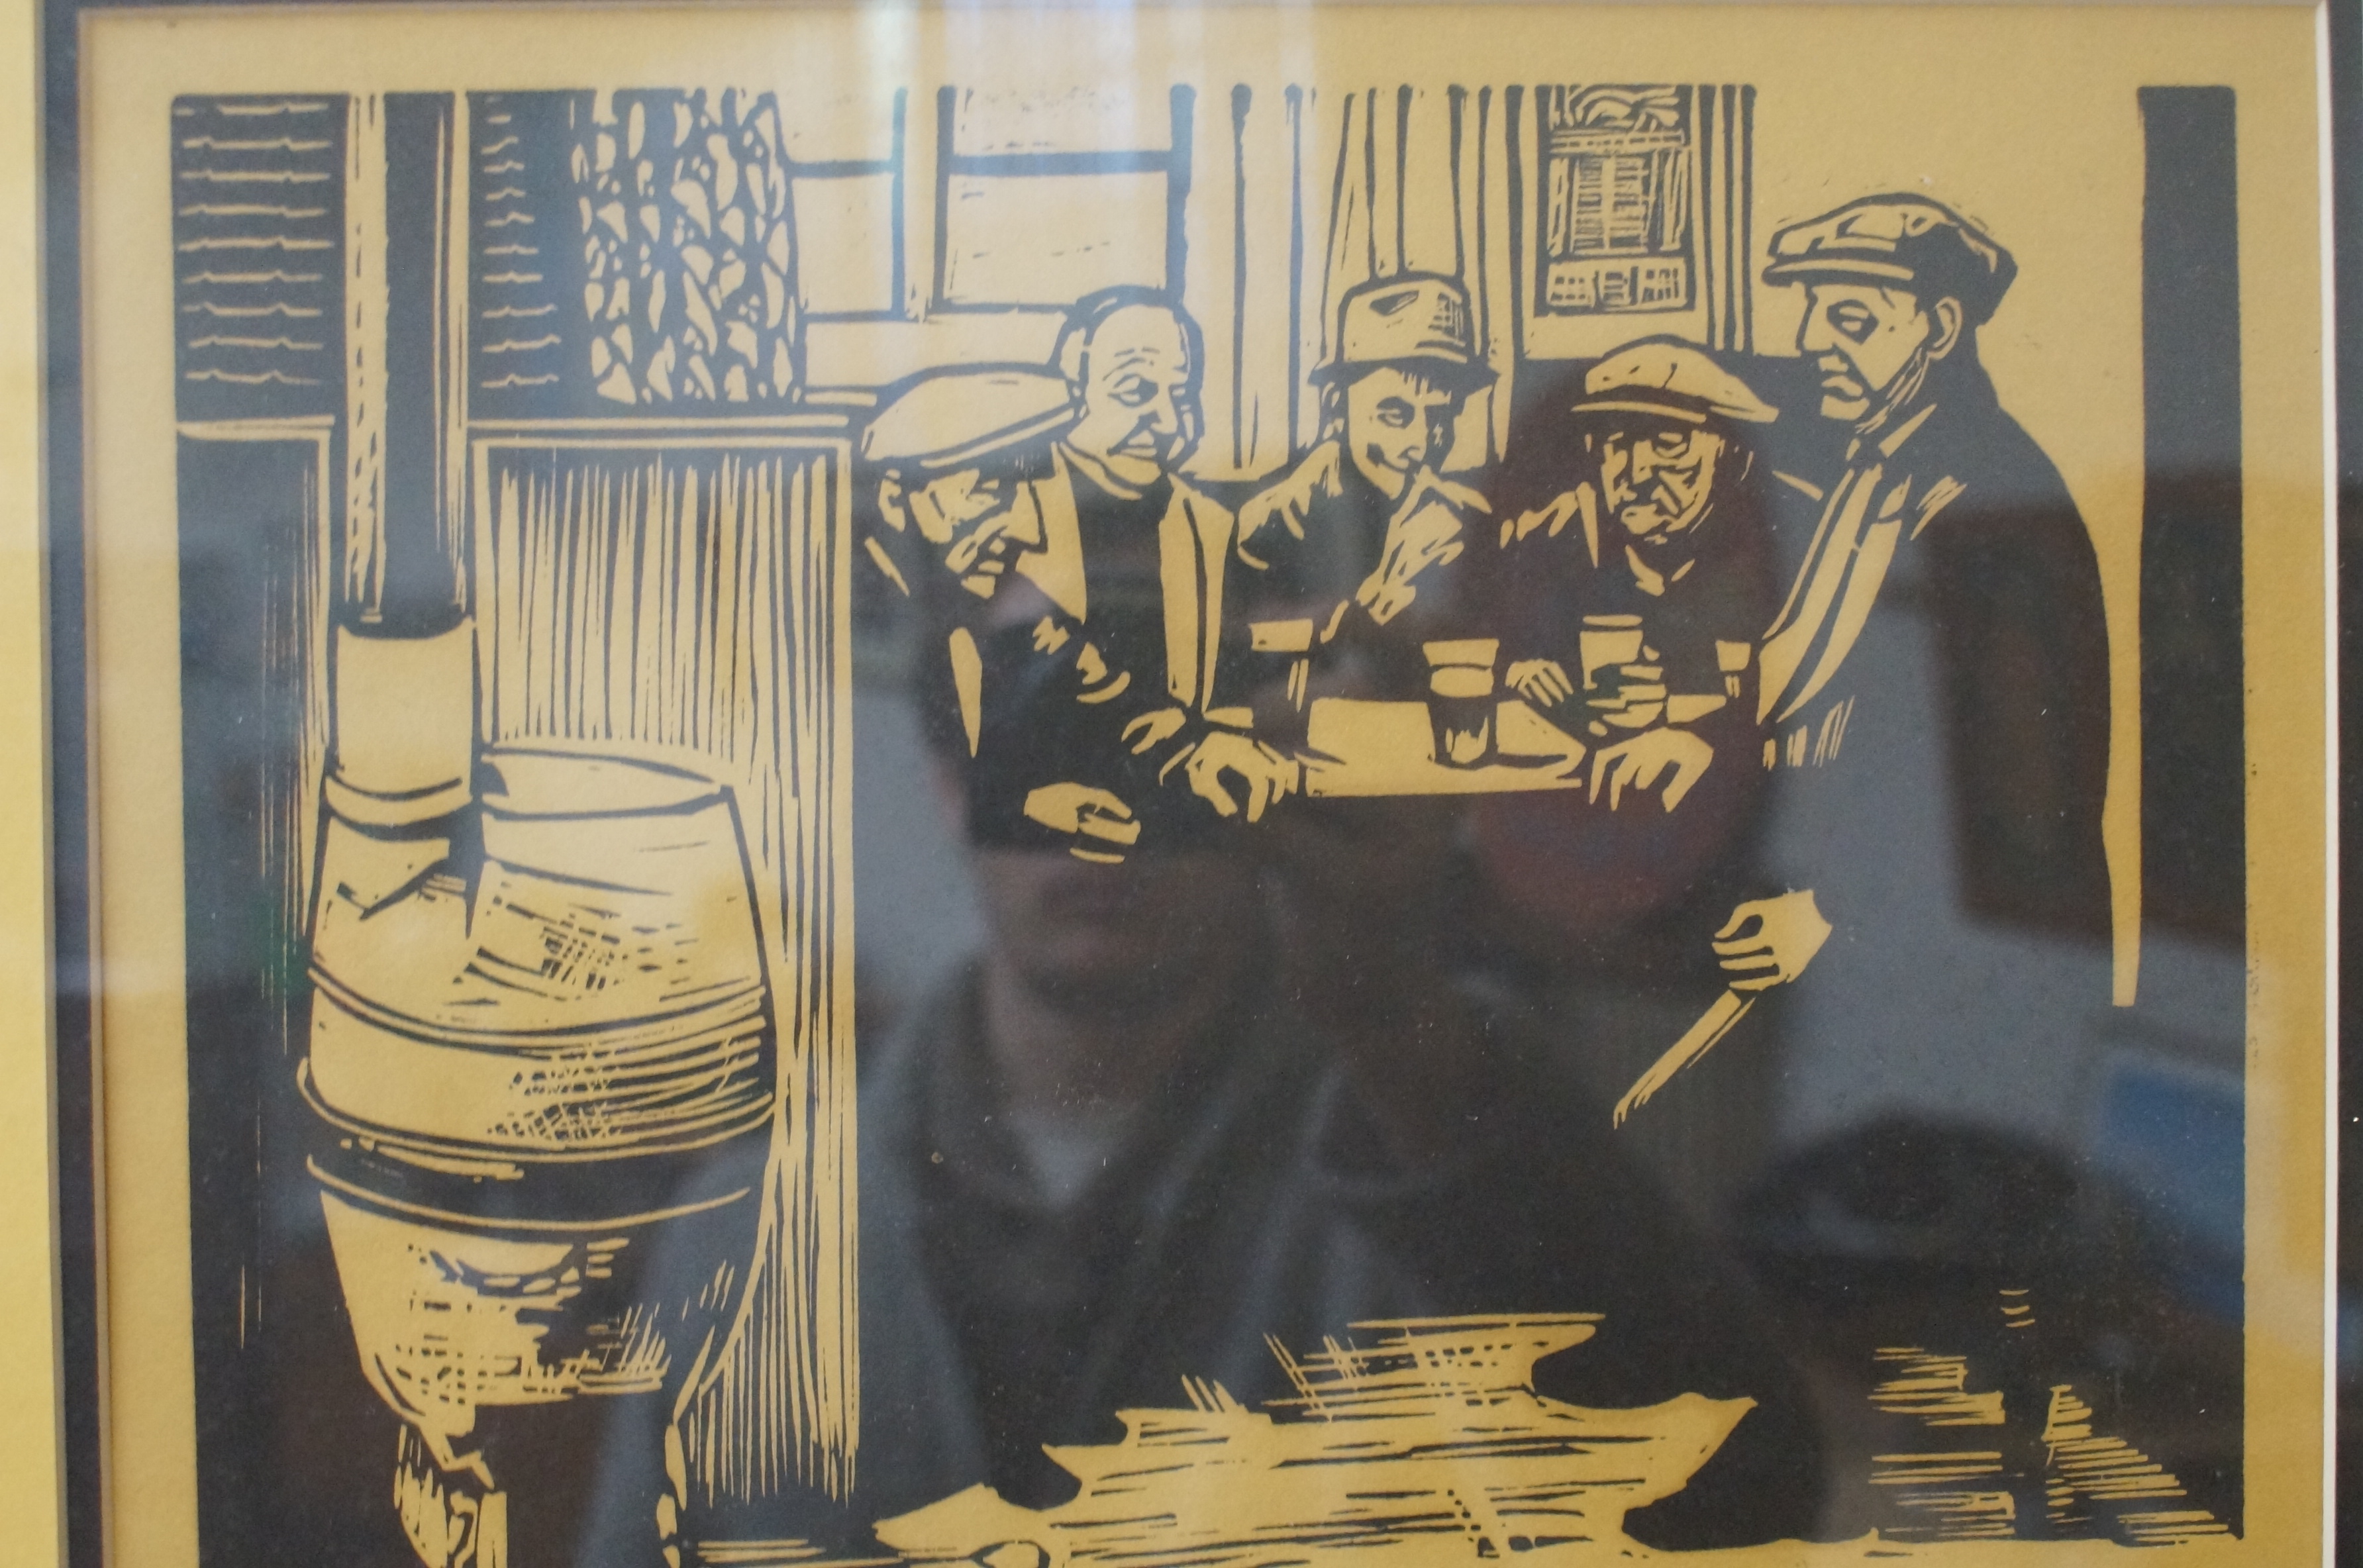 Rodger Hampson limited edition print 4/10 'Beer dr